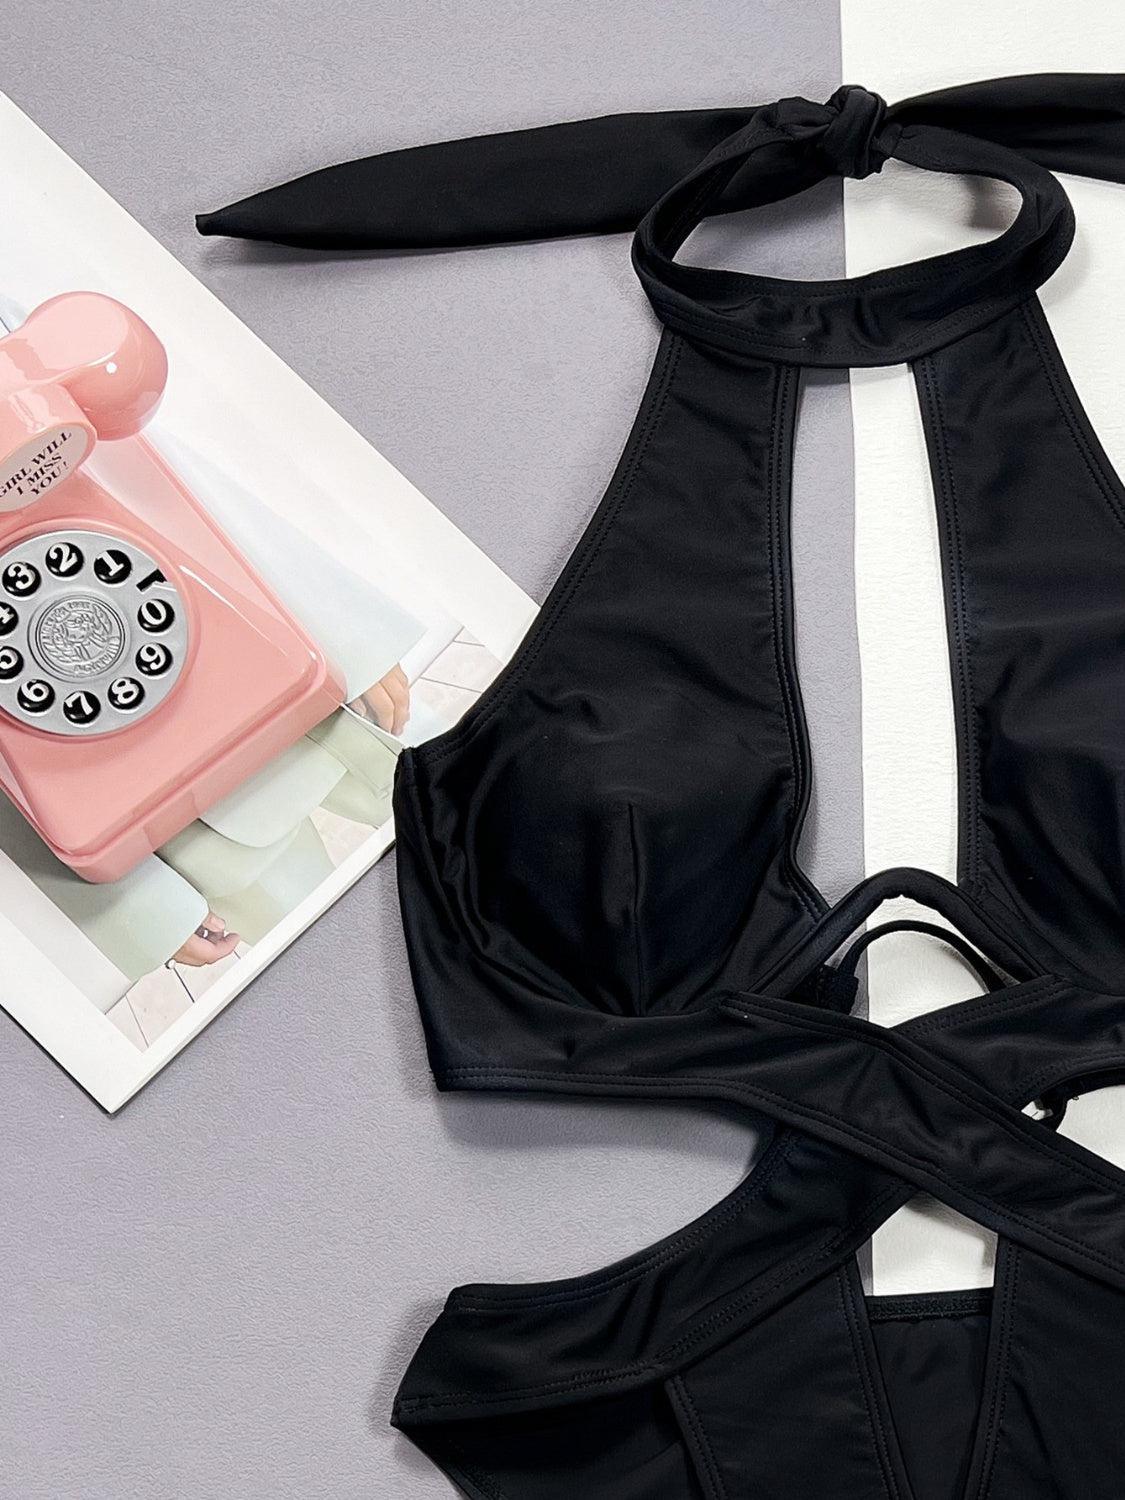 a woman's bra with a phone on it